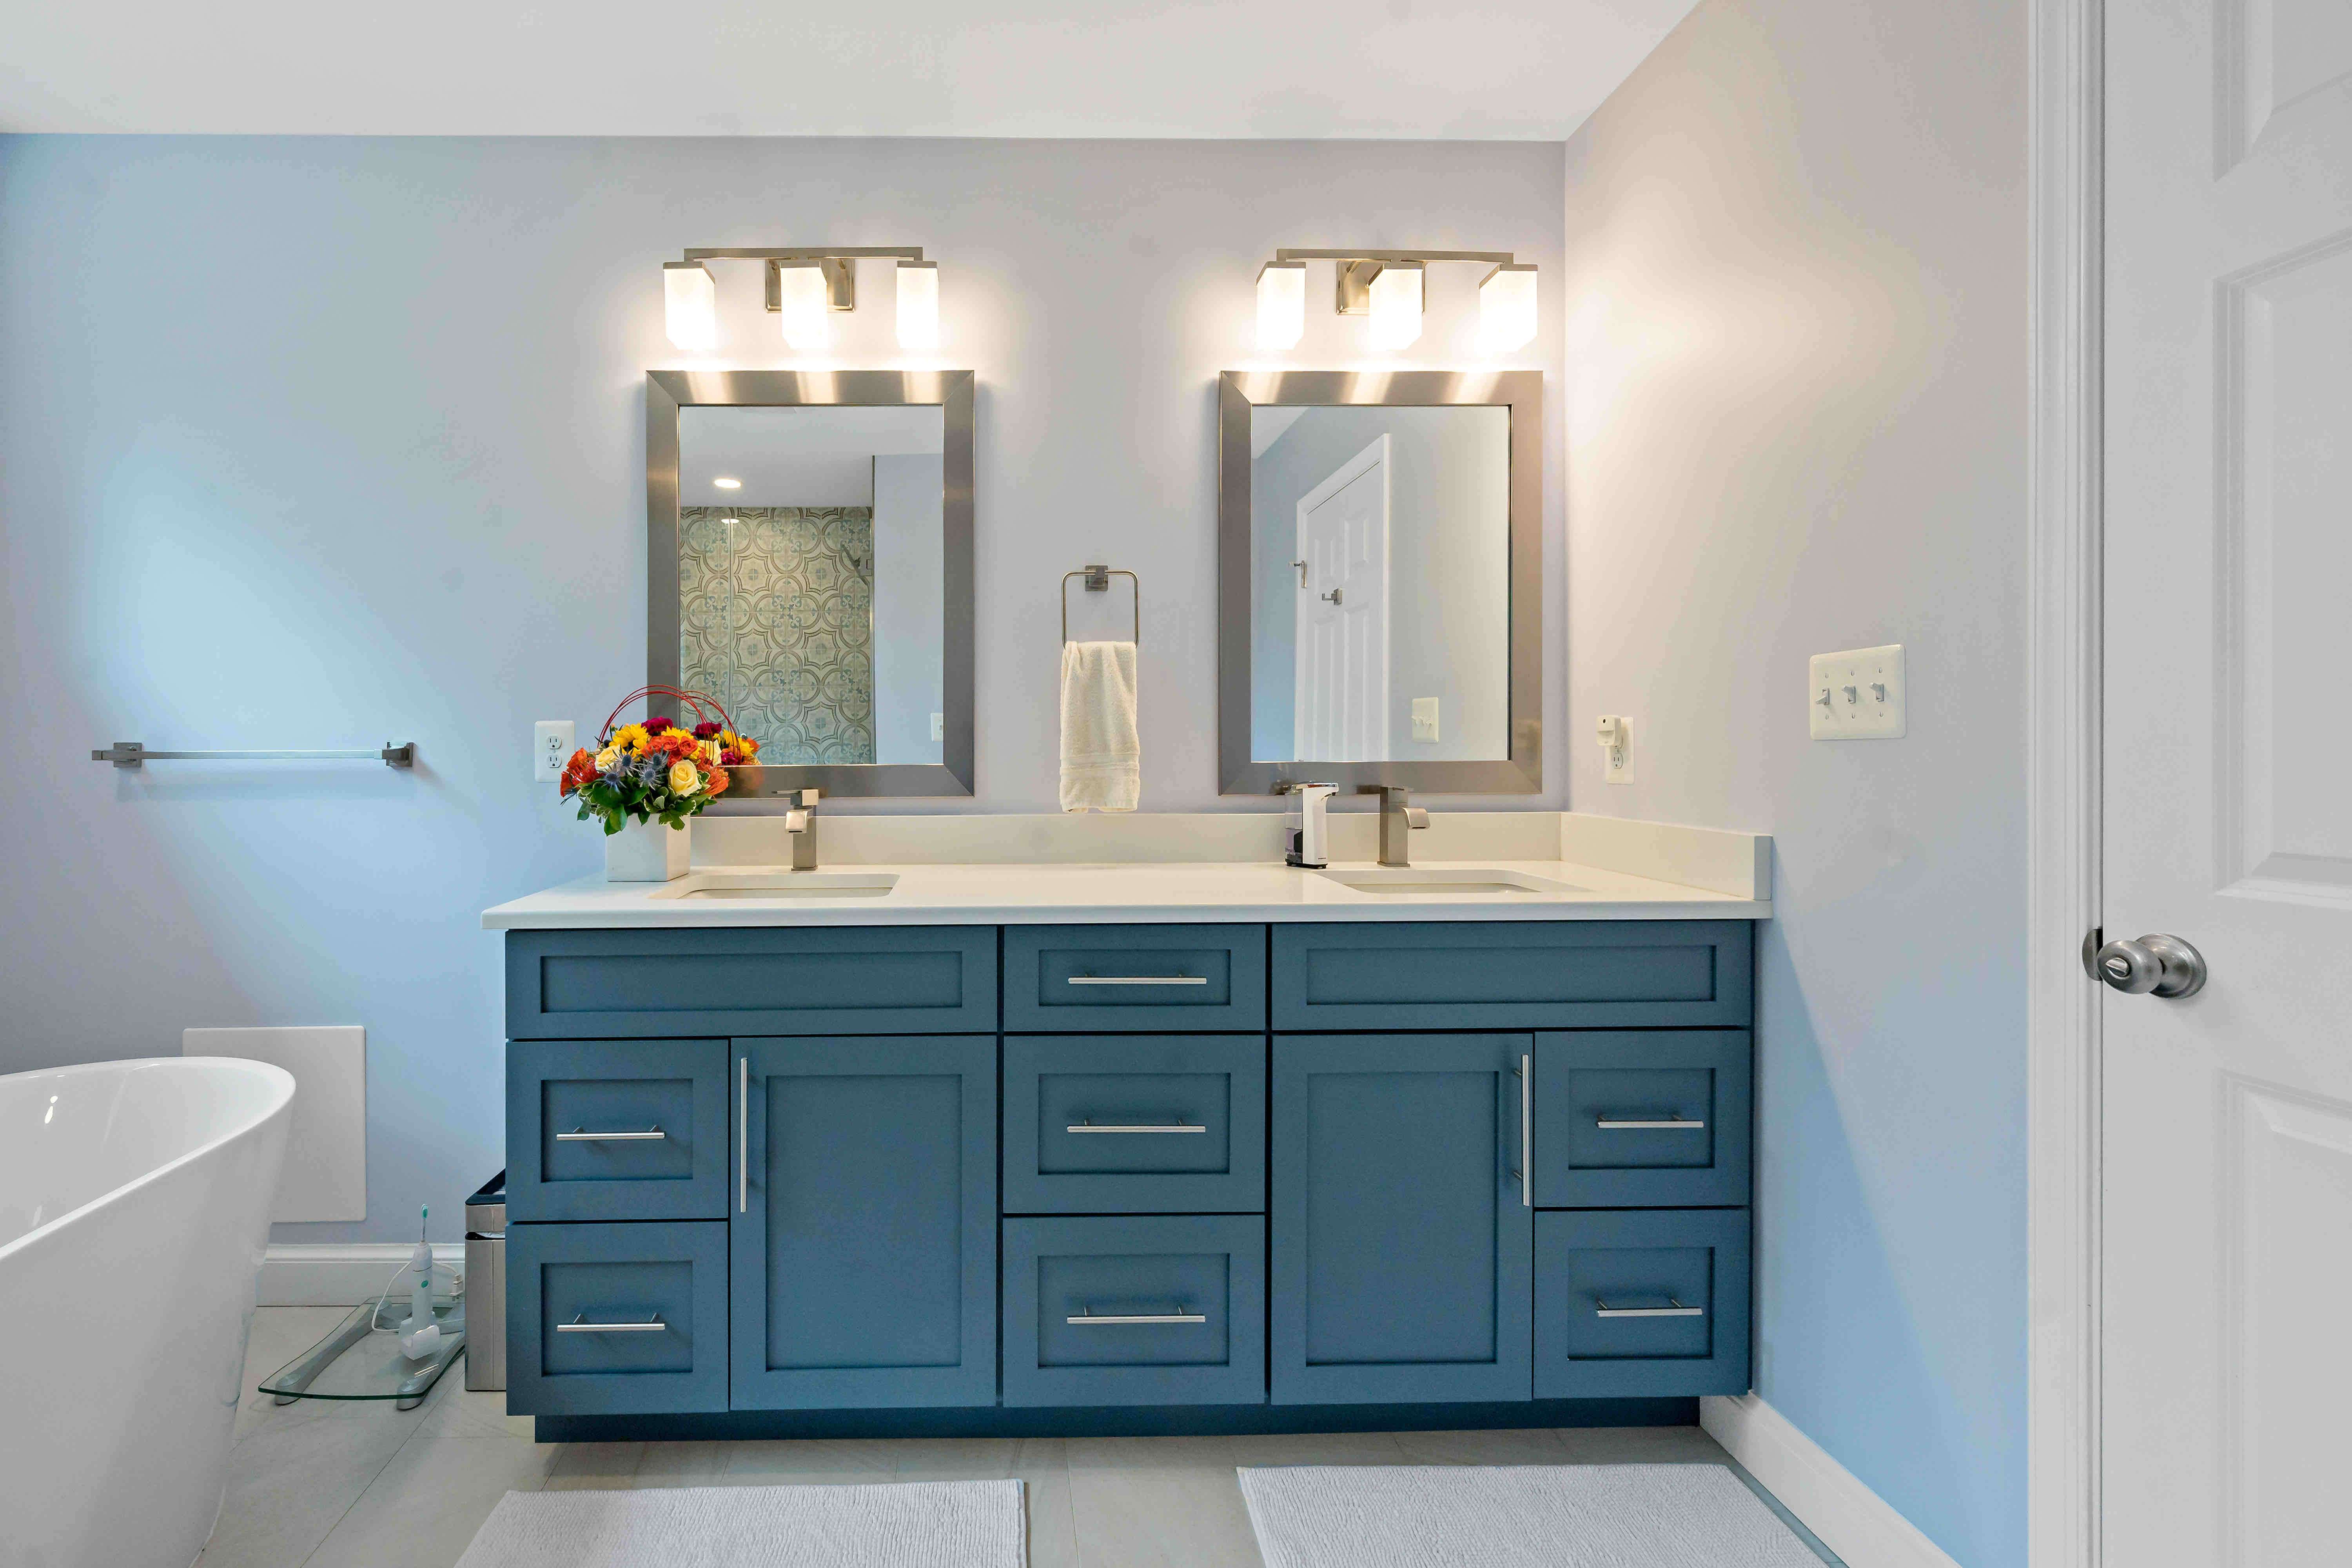 Double sink and mirror in full blue bathroom